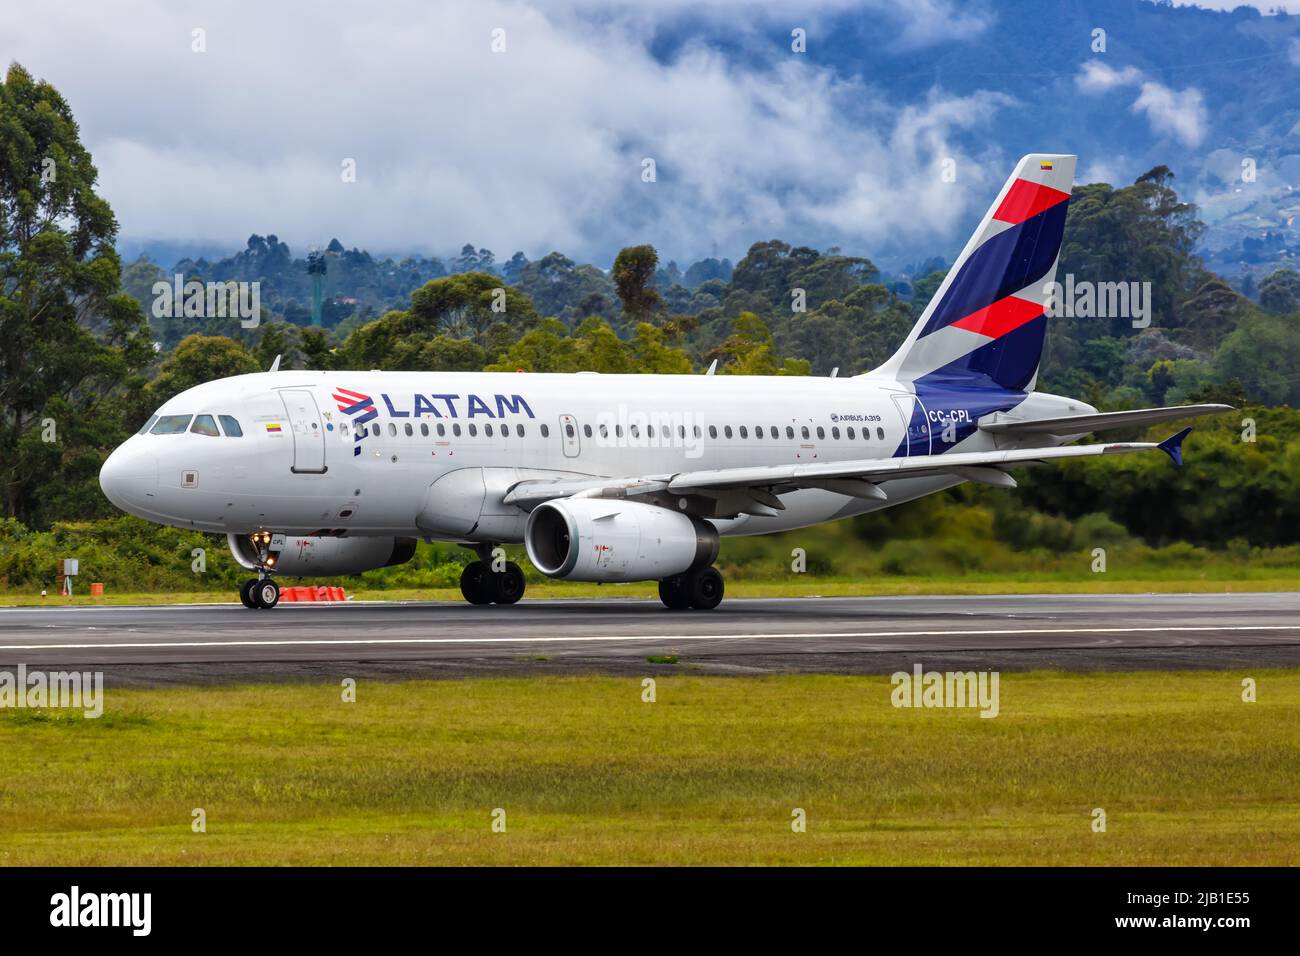 Medellin, Colombia - April 19, 2022: LATAM Airbus A319 airplane at Medellin Rionegro airport (MDE) in Colombia. Stock Photo